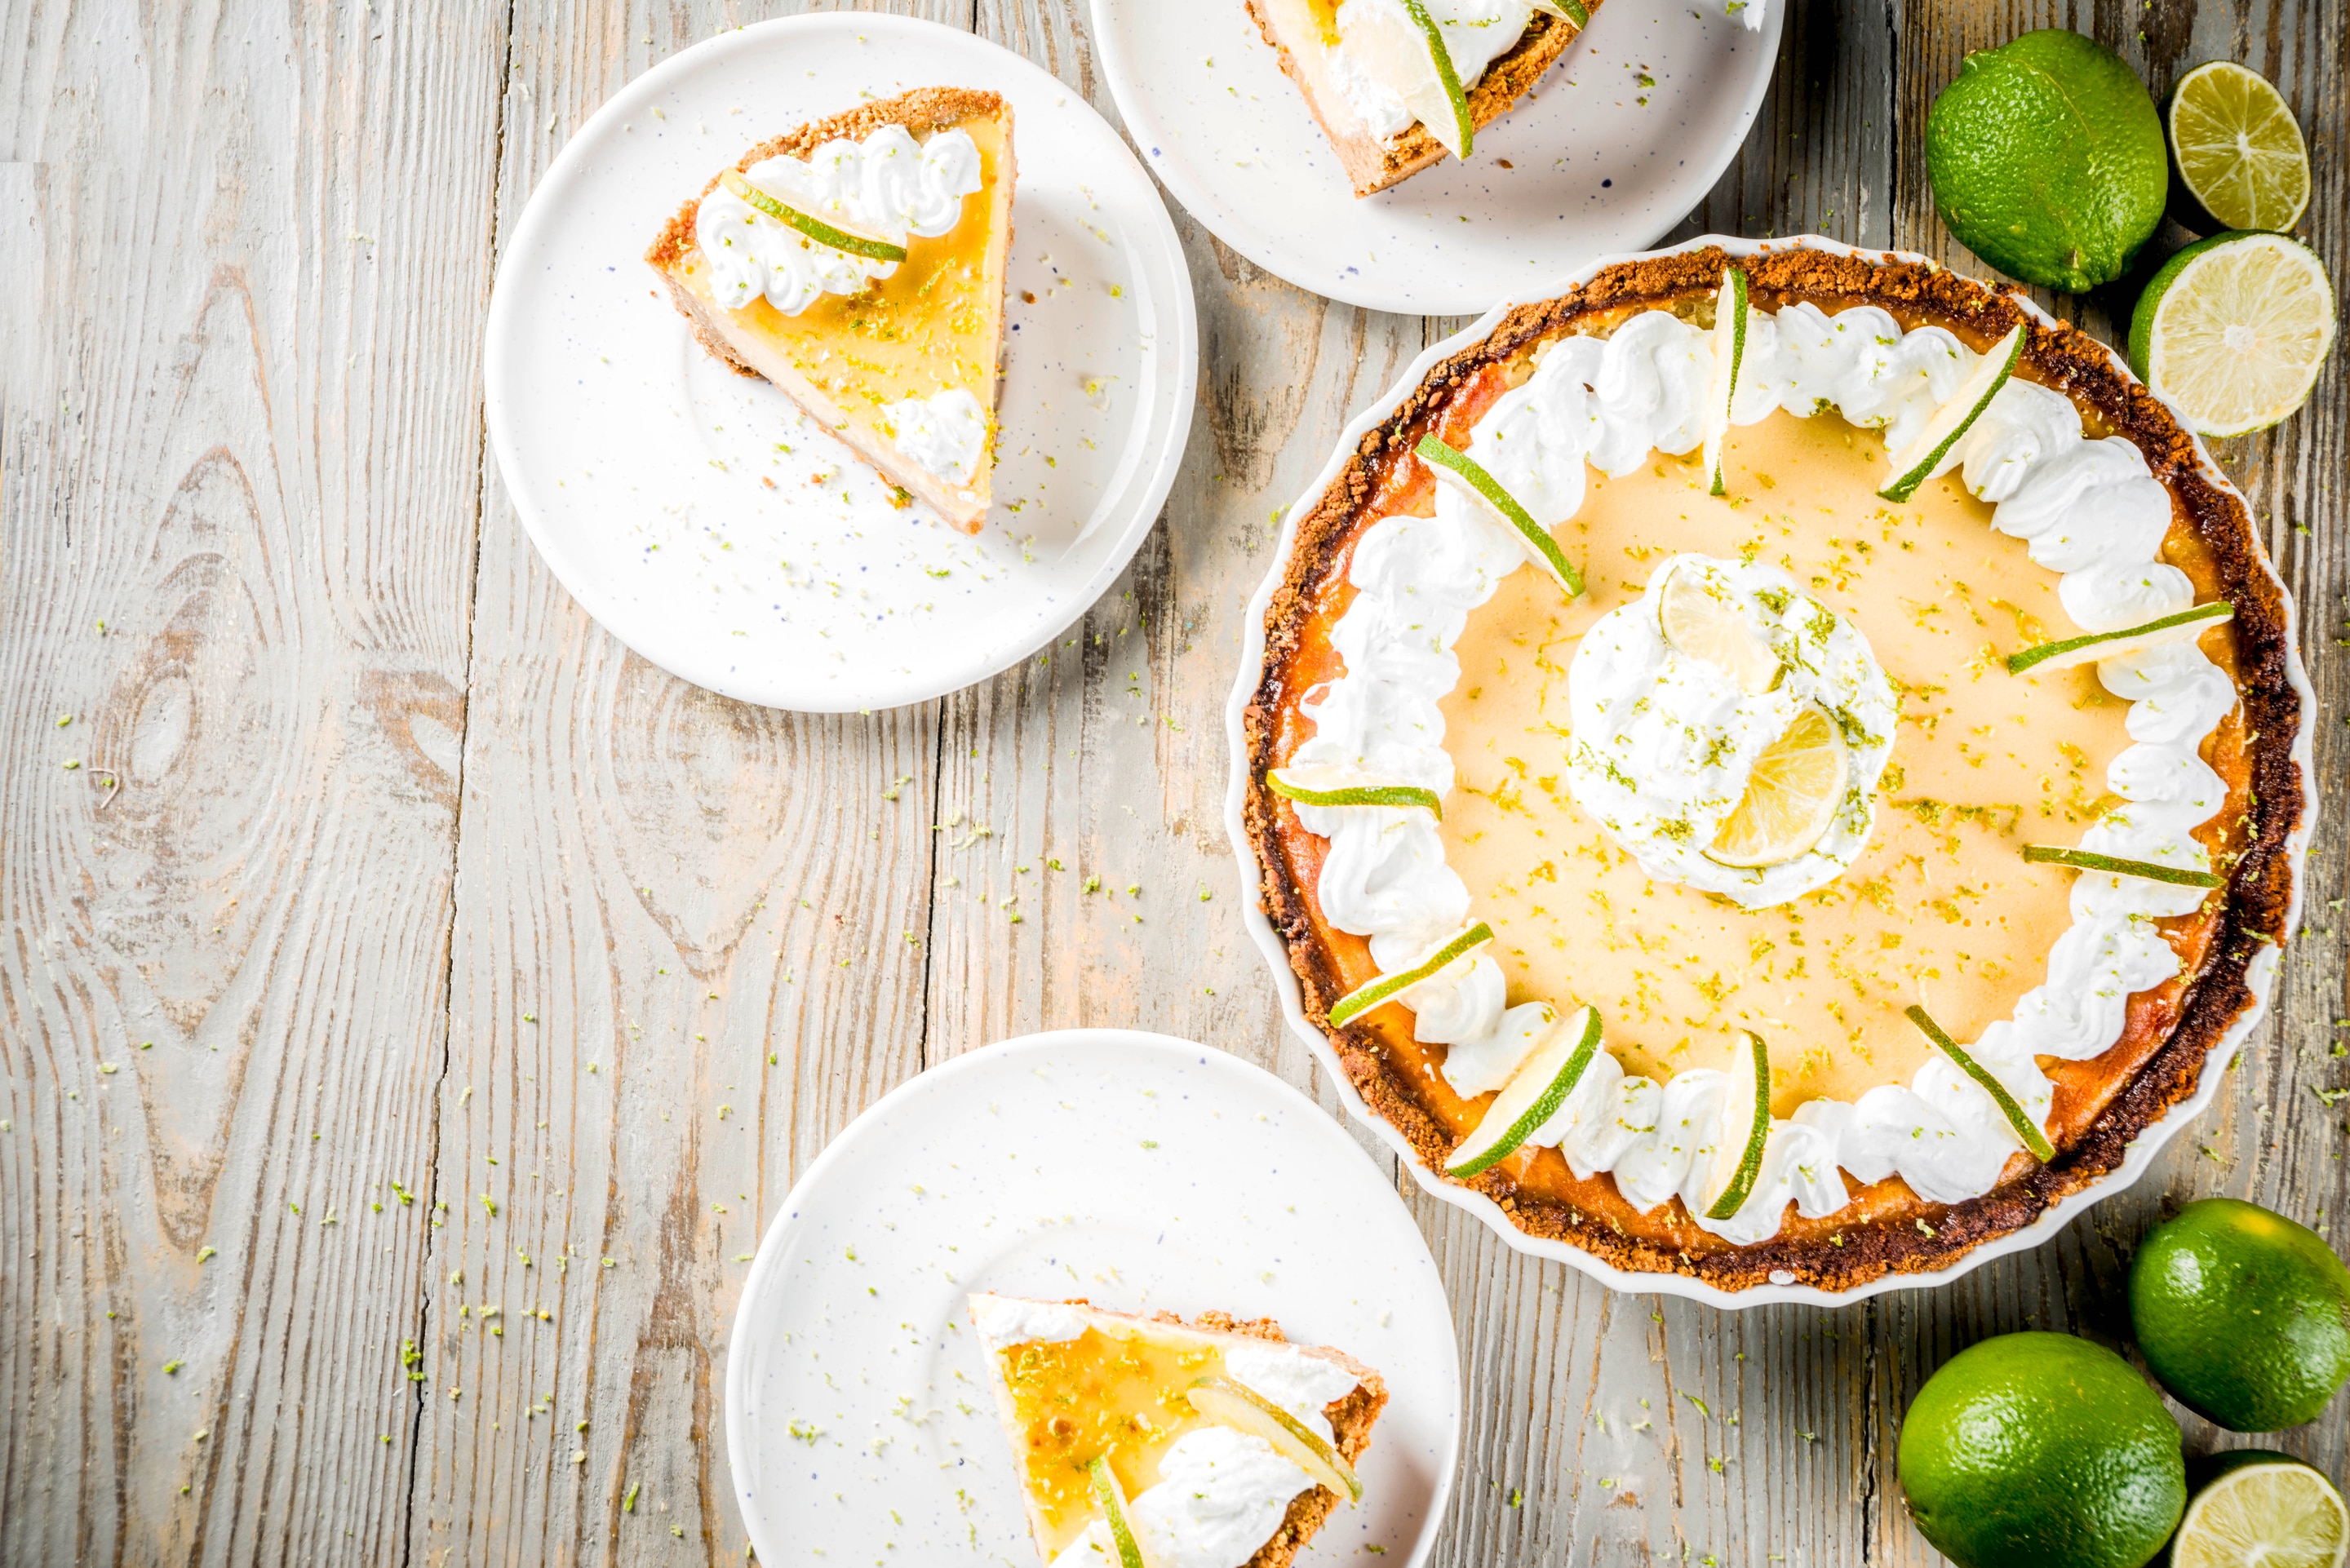 A Key Lime Pie and slices of it on a wooden table